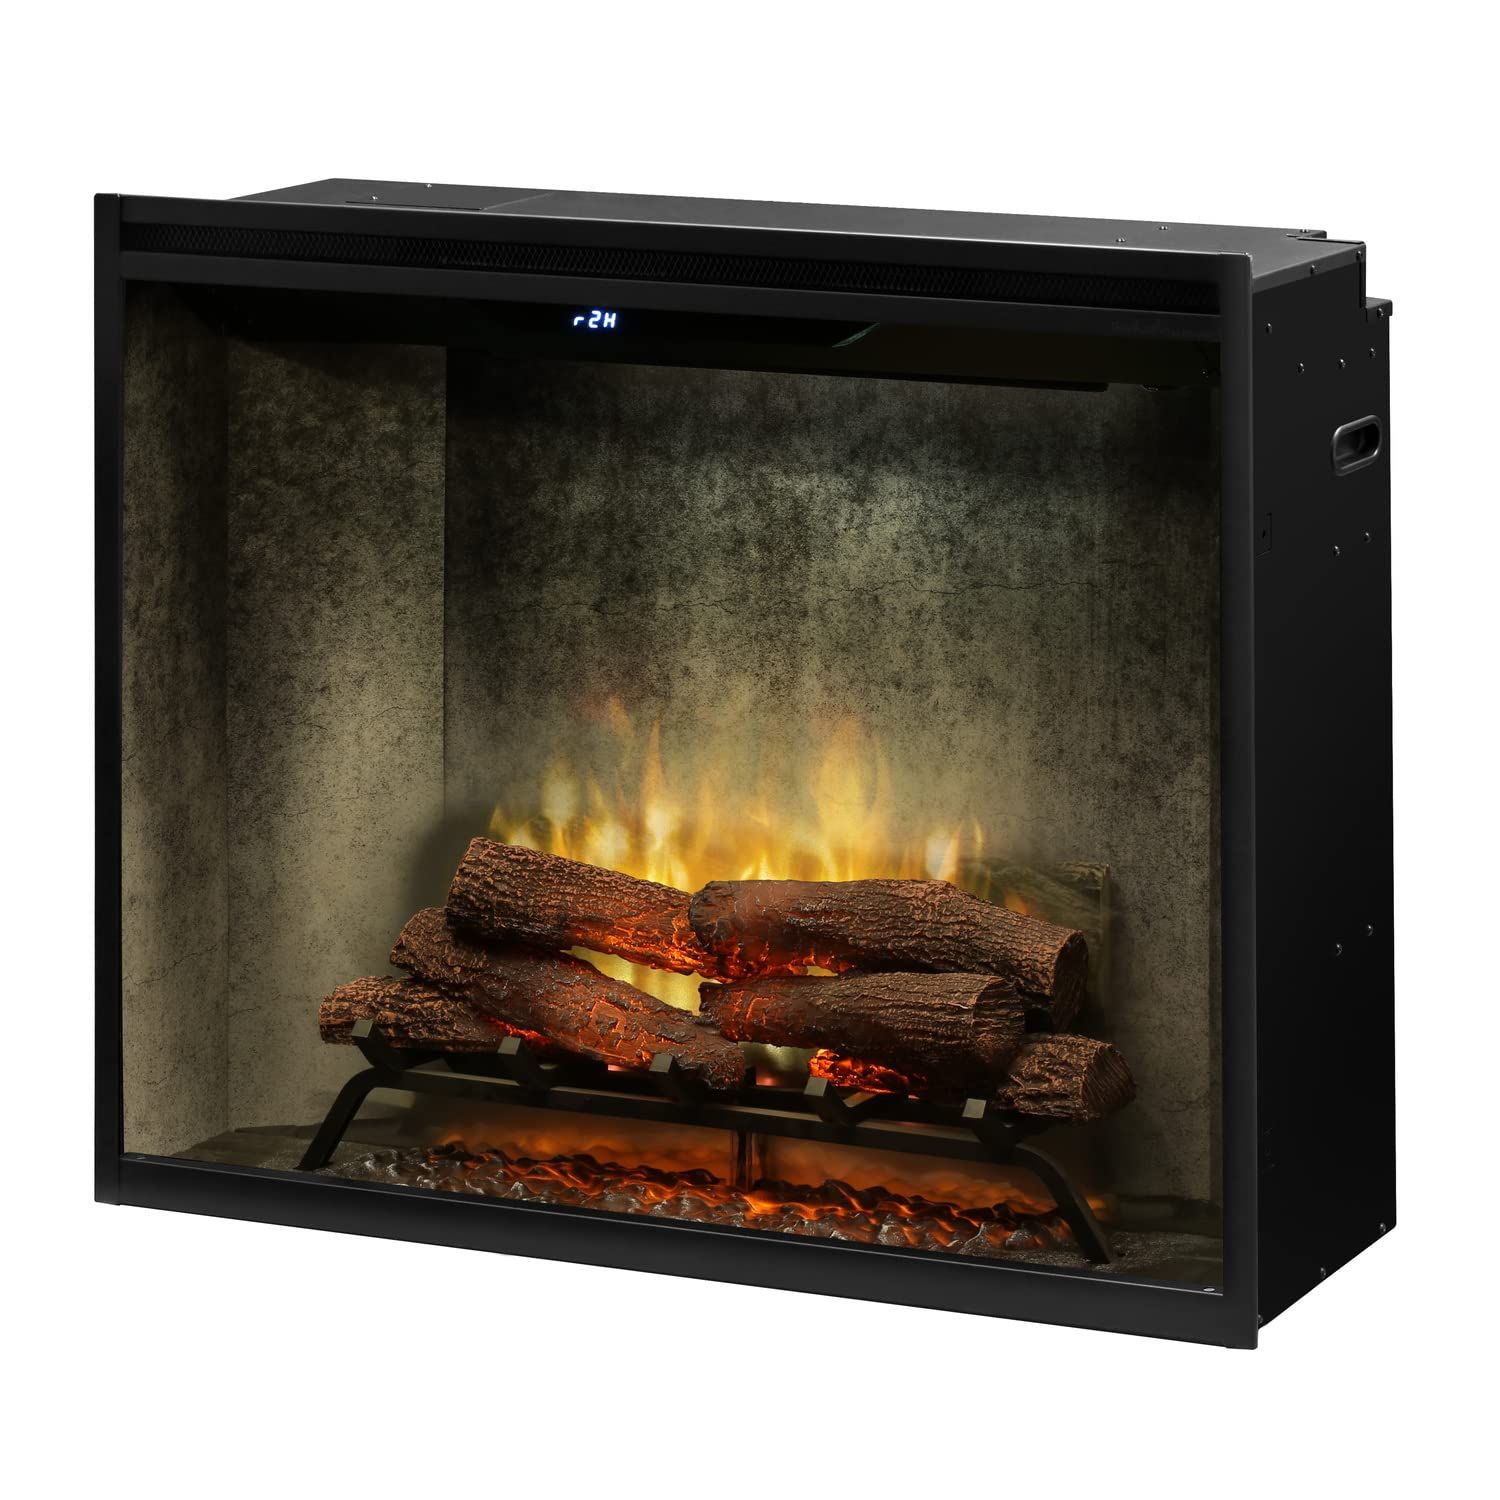 Dimplex Revillusion 36" Built-in Electric Fireplace with Weathered Concrete Interior & Remote Contro | Amazon (US)